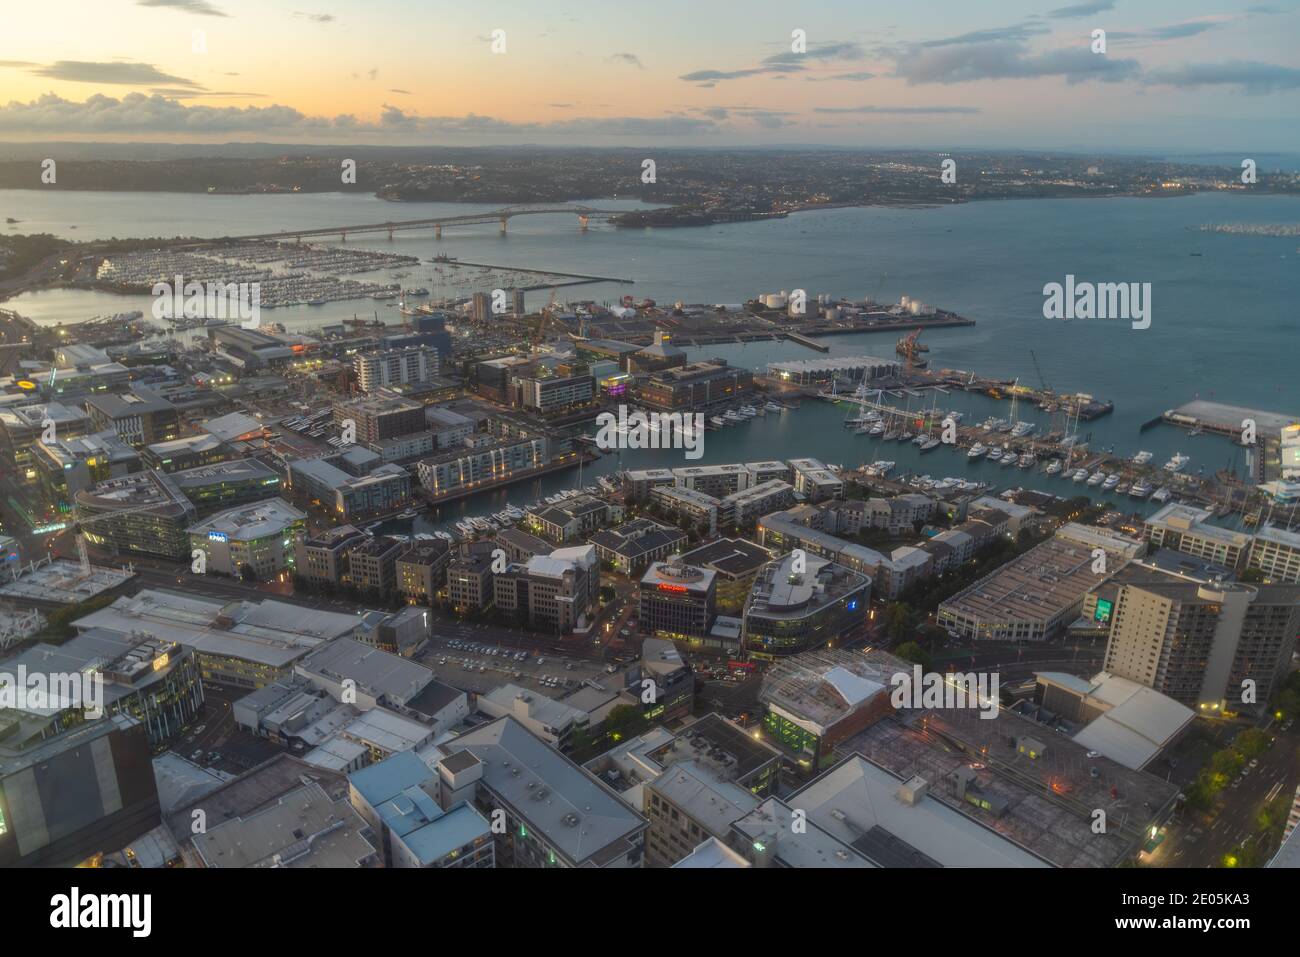 AUCKLAND, NEW ZEALAND, FEBRUARY 19, 2020: Night aerial view of waterfront of Auckland from Sky tower, New Zealand Stock Photo